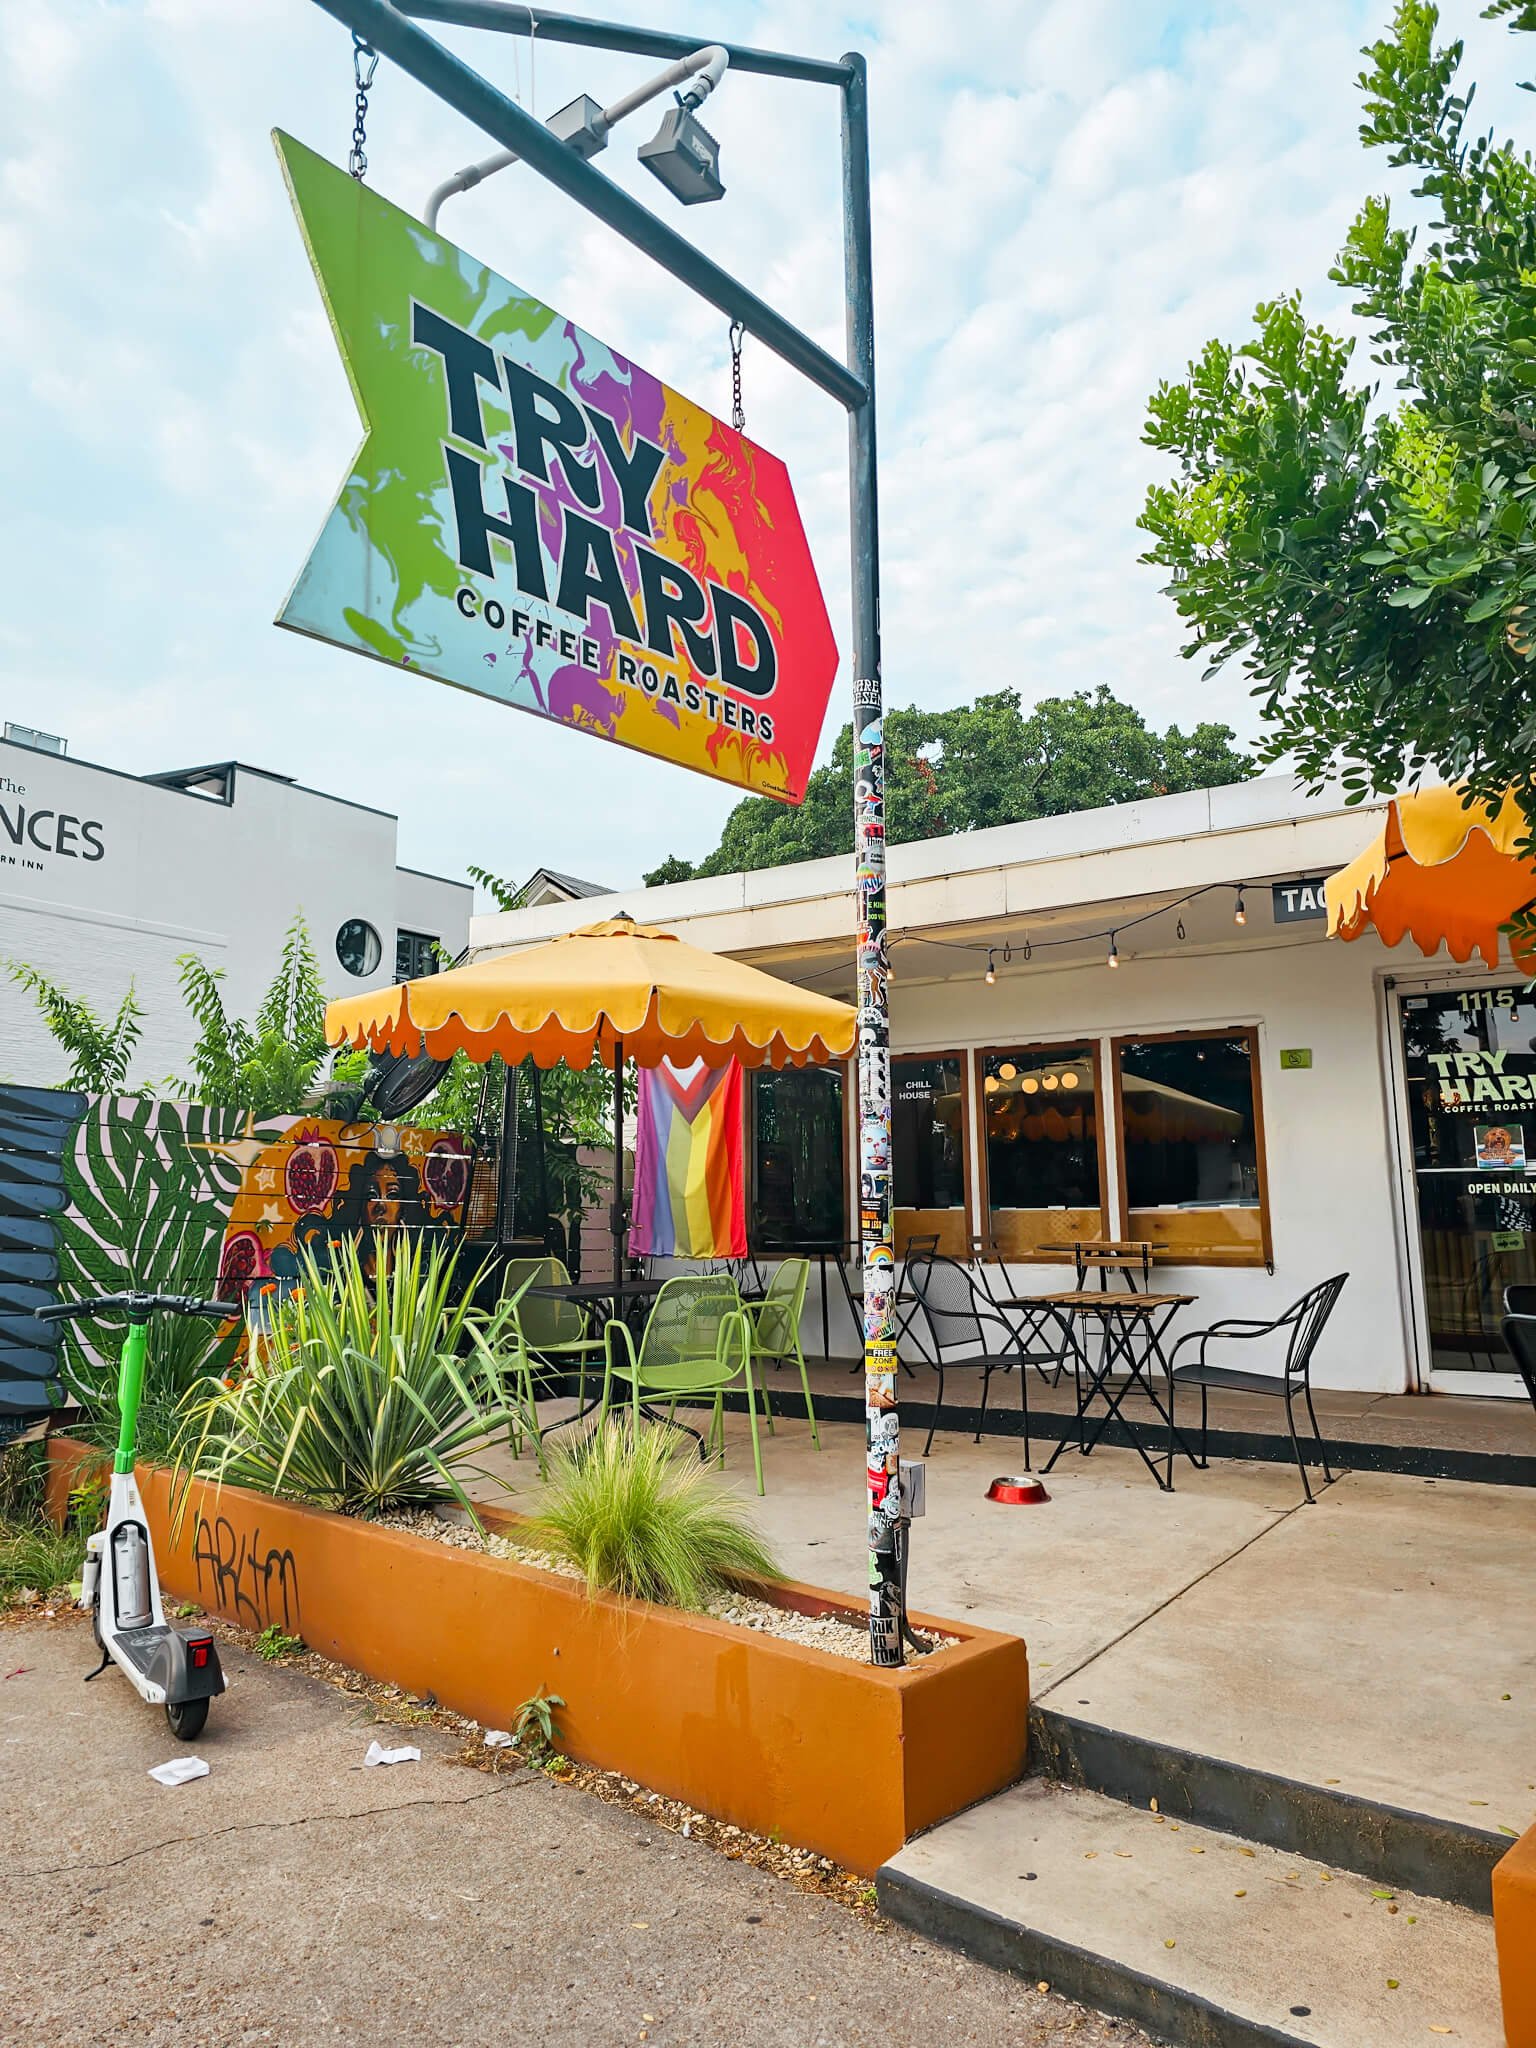 Try hard cafe, cafes in Austin